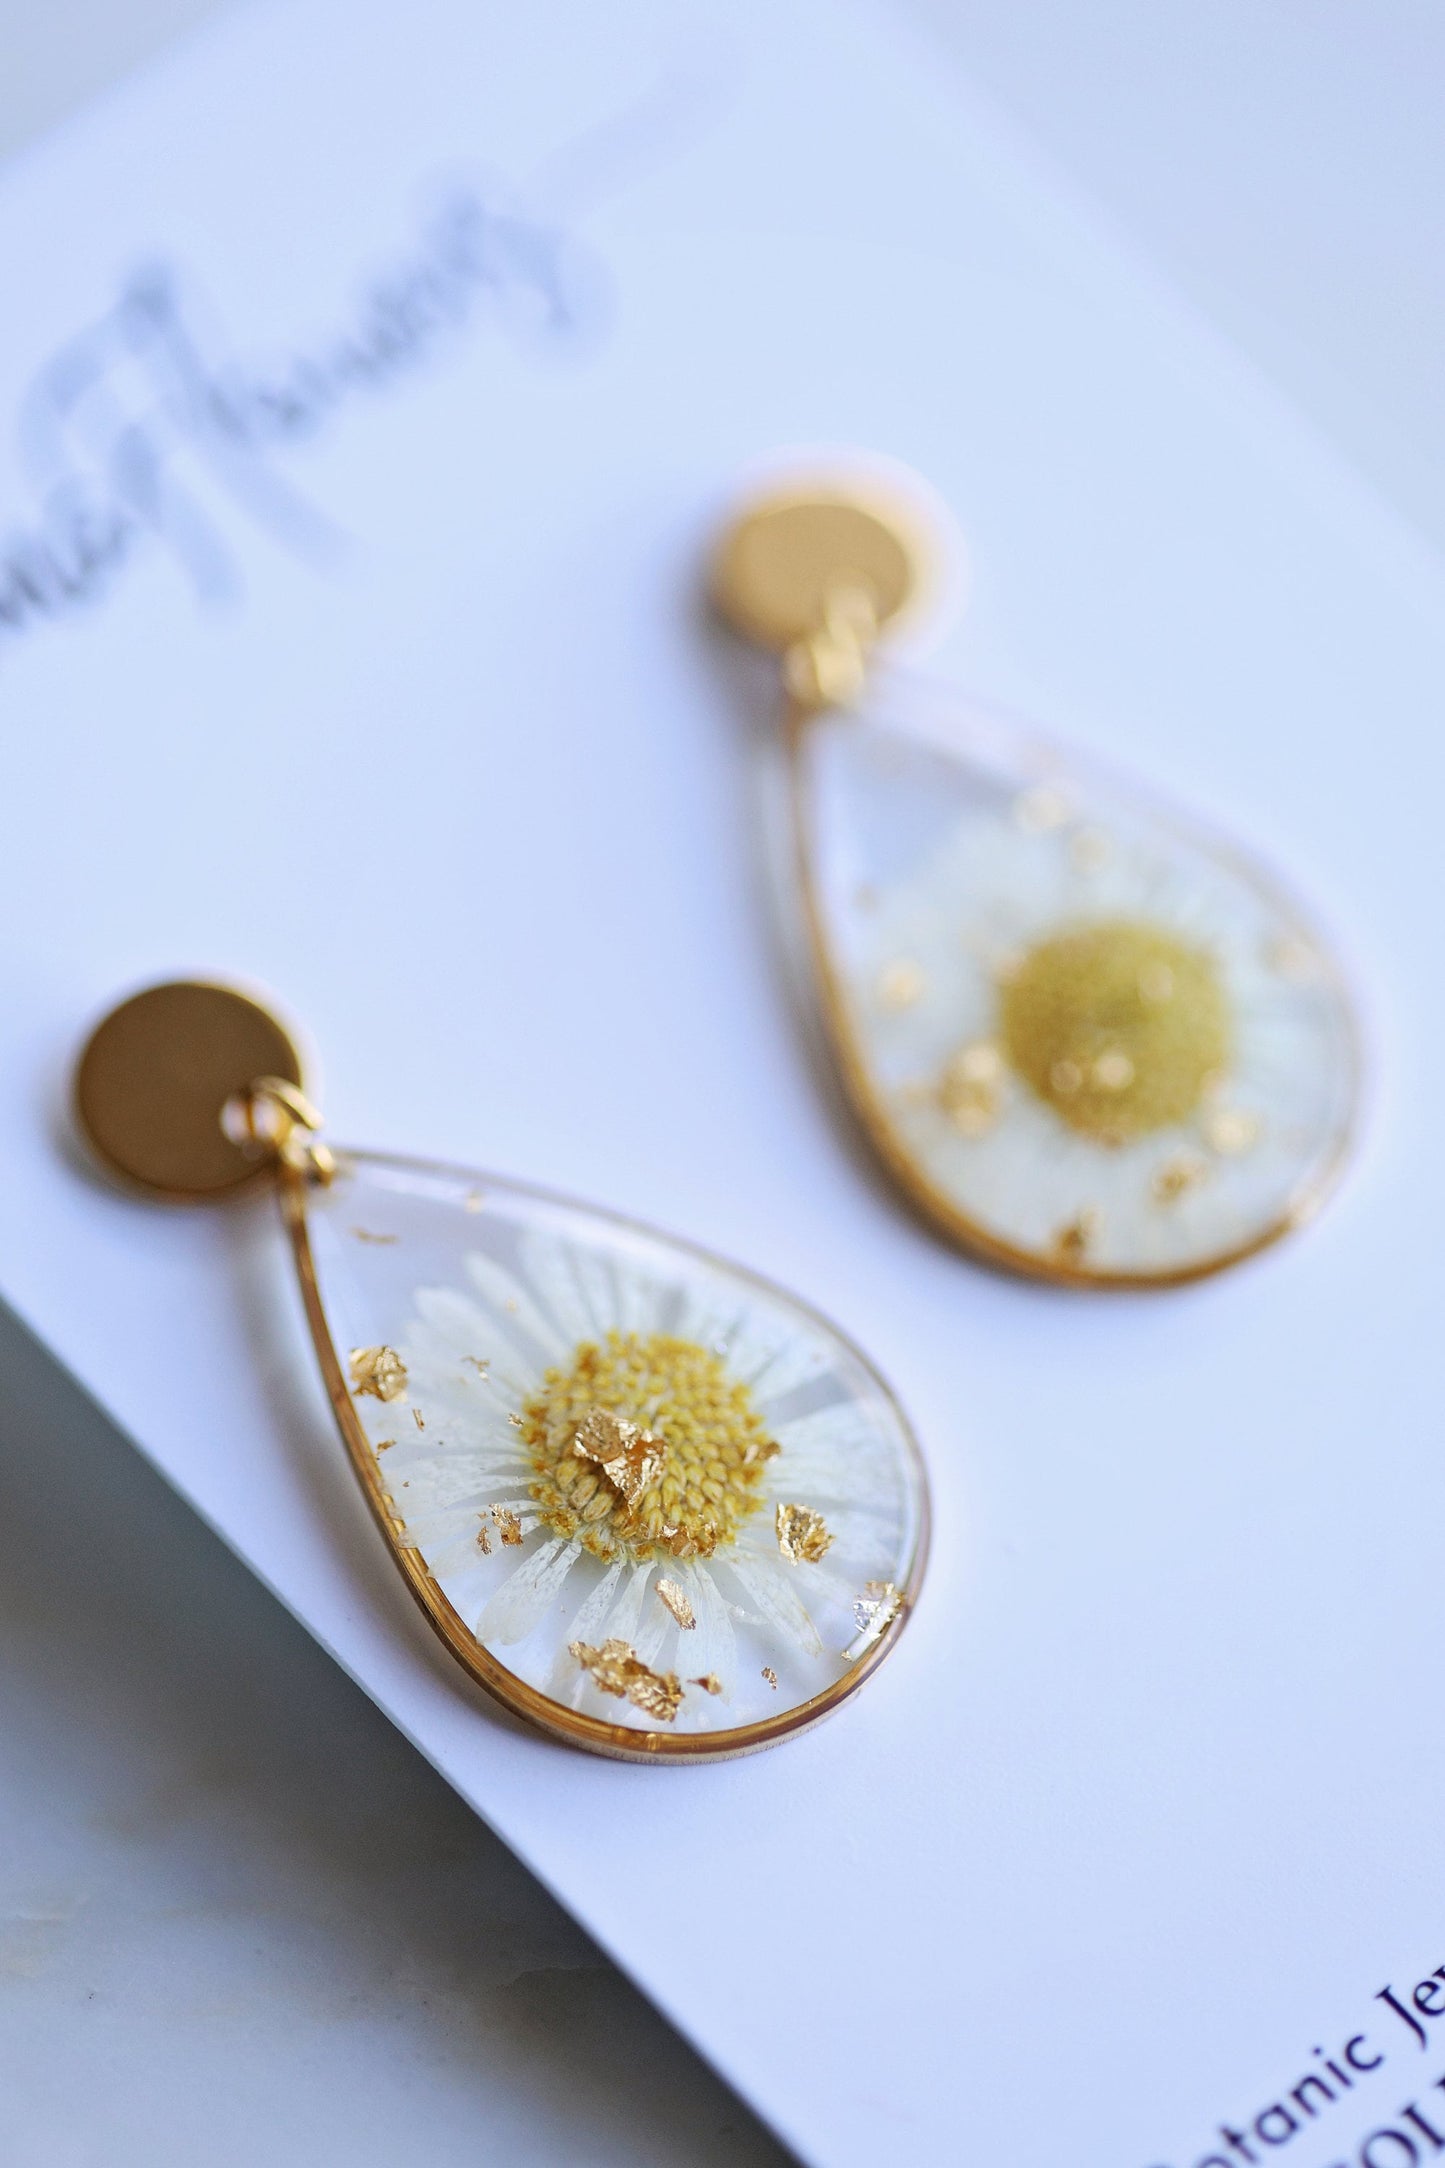 Real Daisy flower Necklace and Earrings dried and Pressed in Resin with 18K Gold Plated | Botanical jewelry